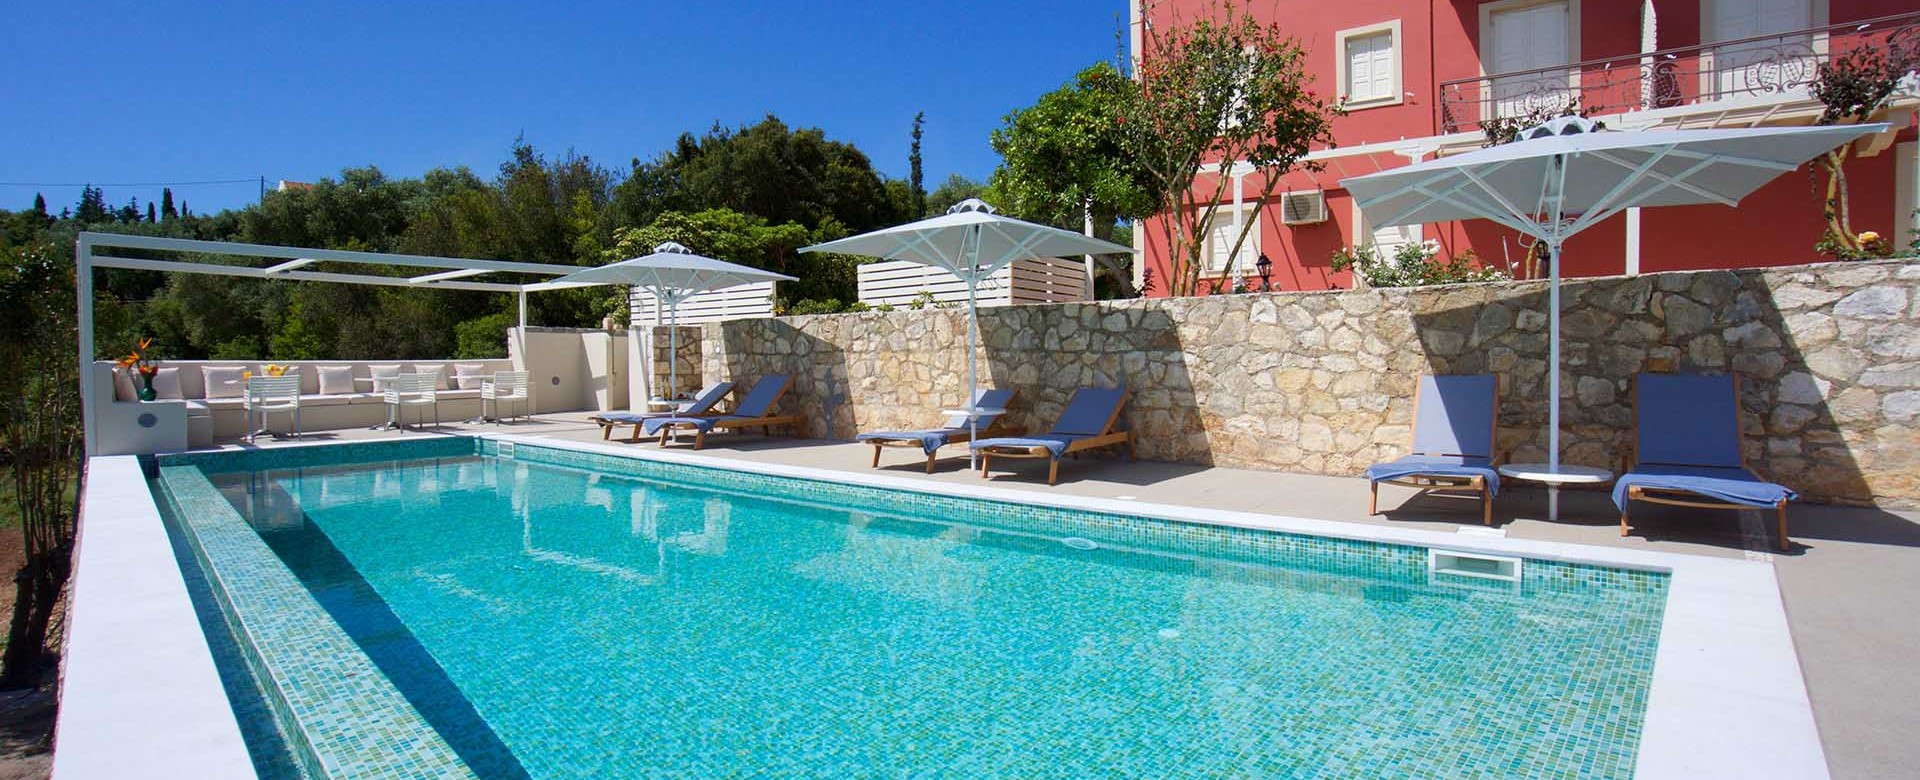 Pool and sun beds ready for a long holiday sunbathing outside Magnolia Apartments, Fiscardo, Kefalonia, Greek Islands